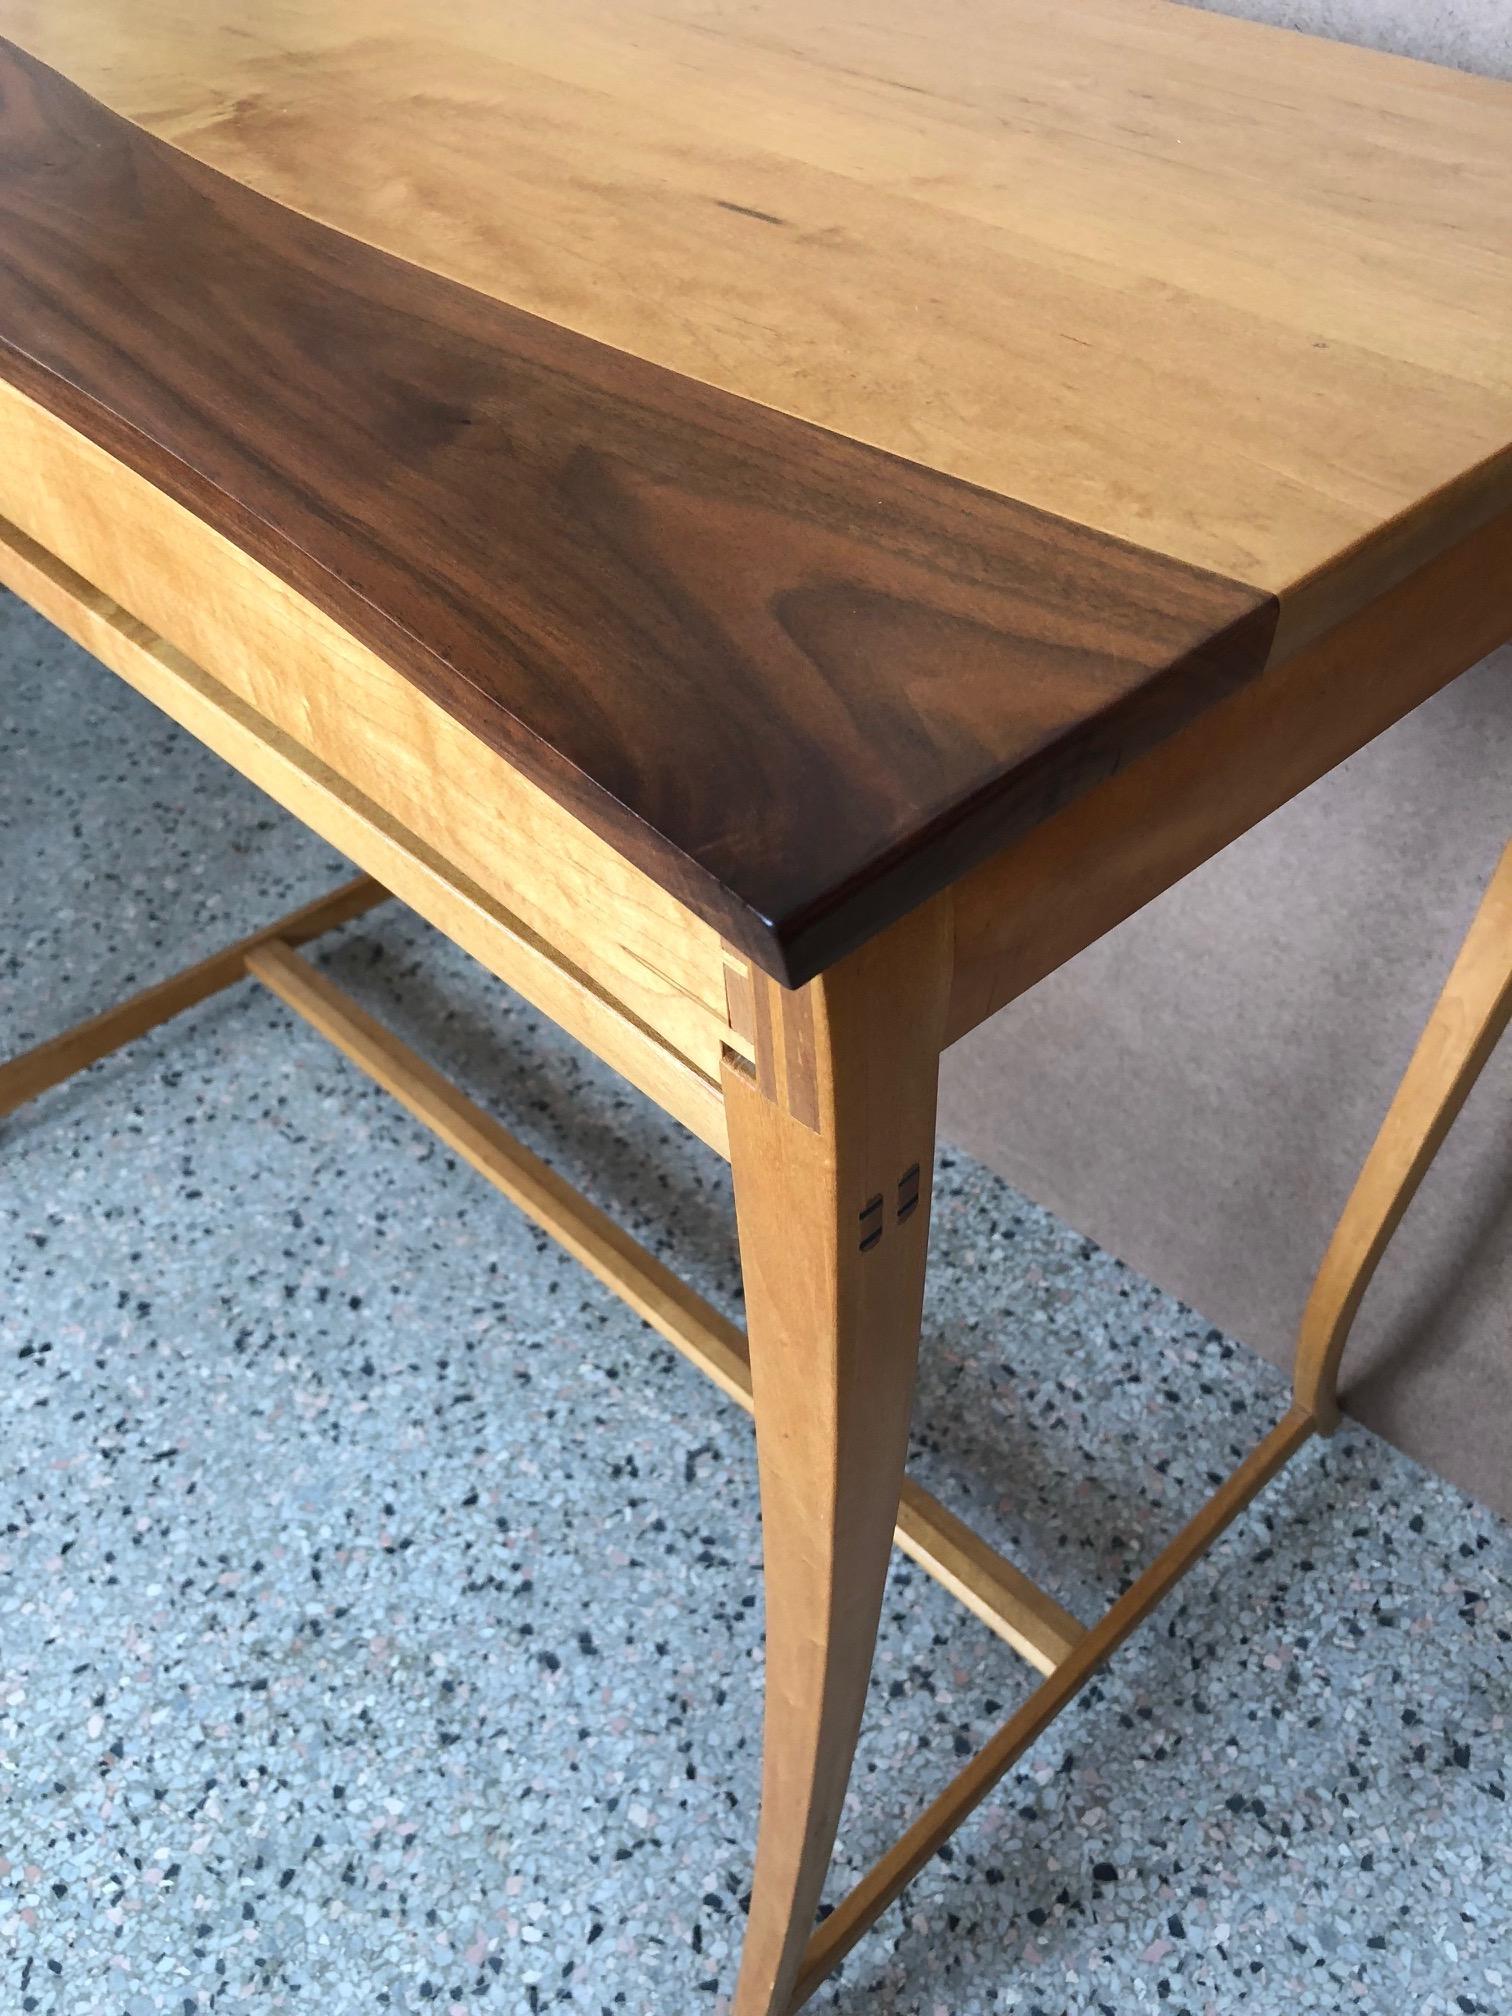 An interesting maple and walnut custom desk/console table with drawer by Byron Robitaille.